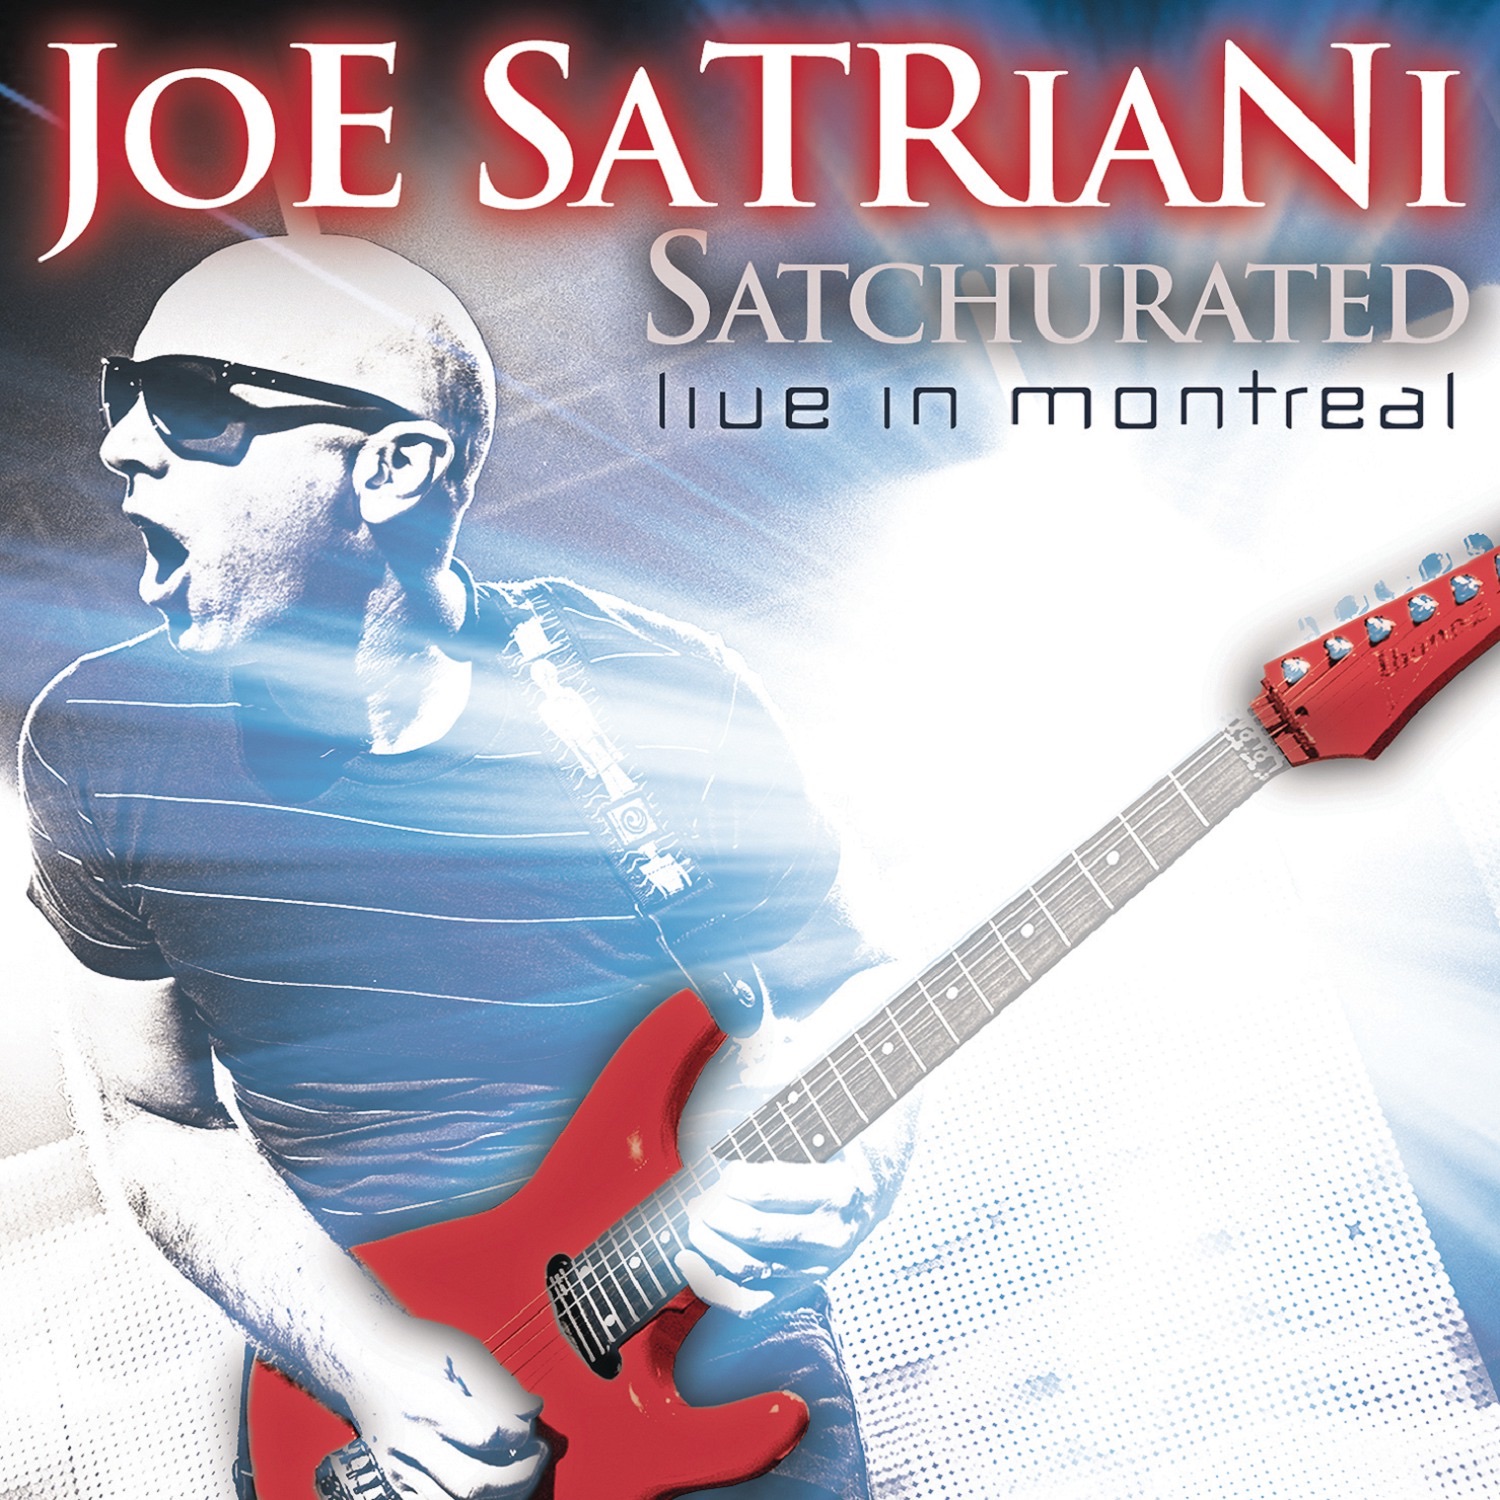 Joe Satriani Satchurated In 3d 2012 Dvdscr Xvid Absurdity Today